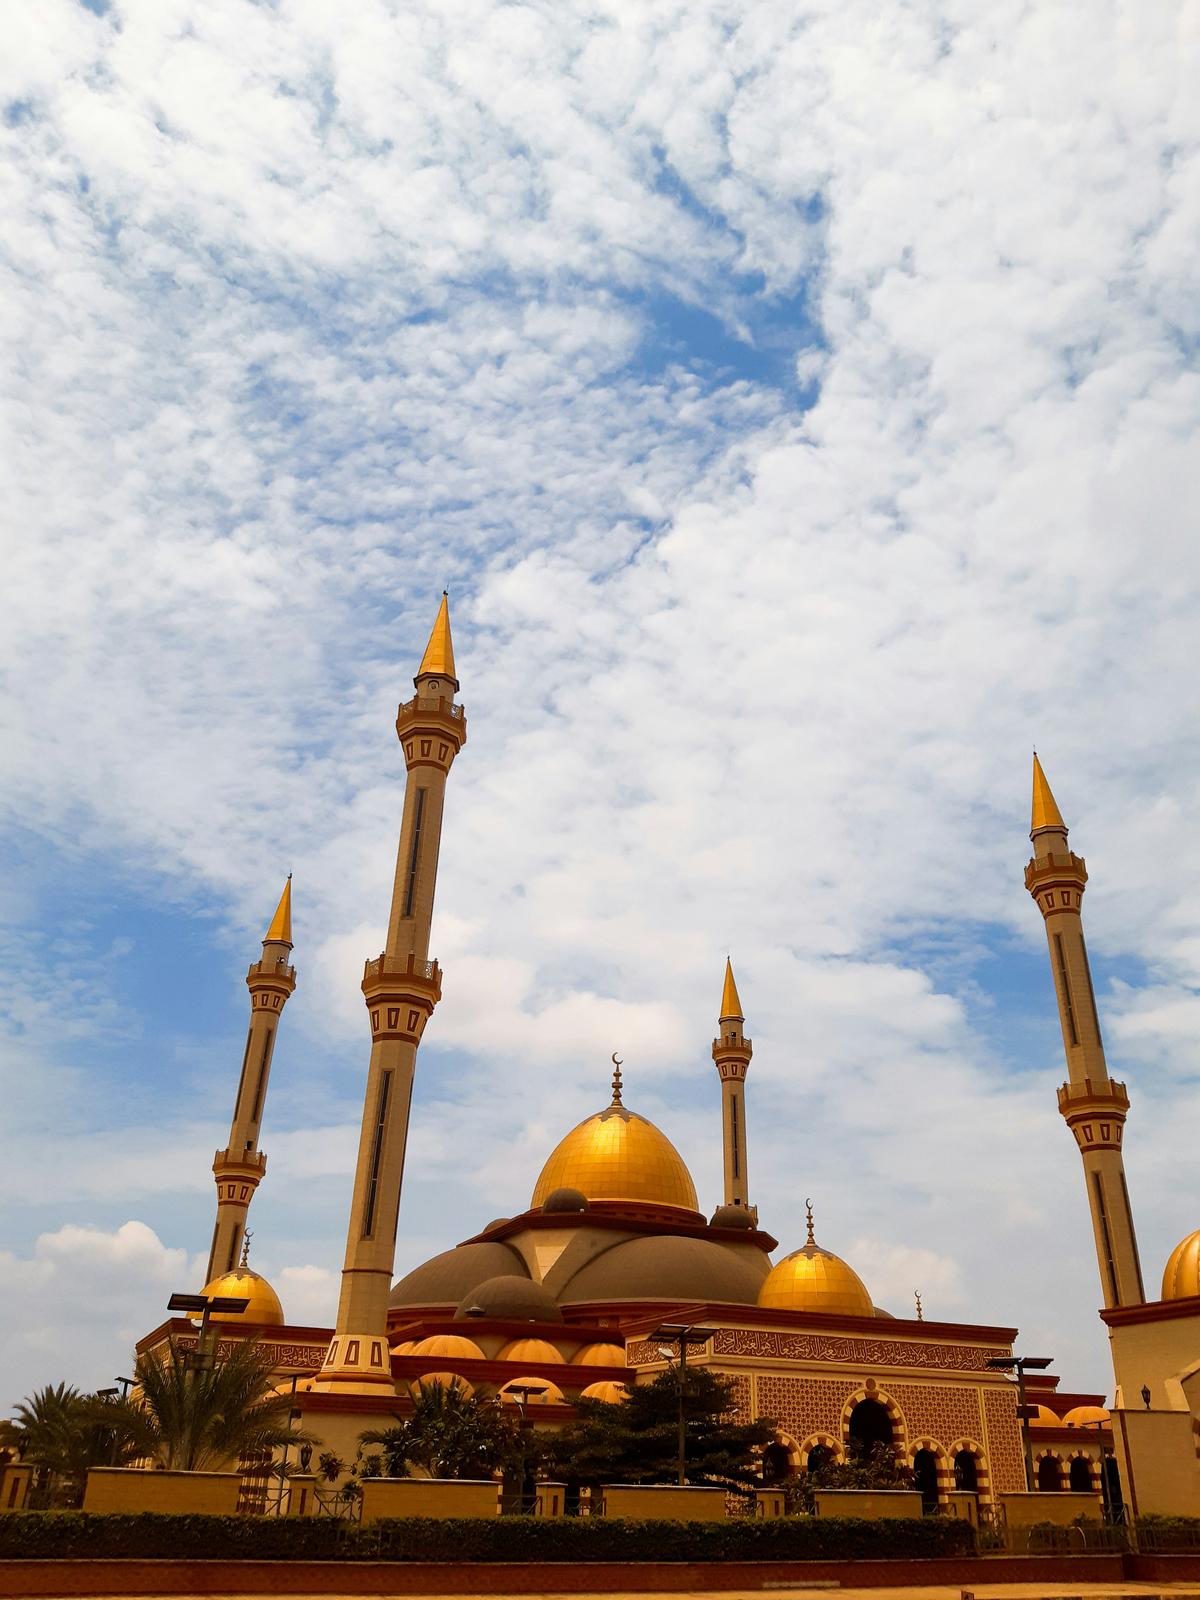 Majestic Mosque with Golden Domes Under Blue Sky